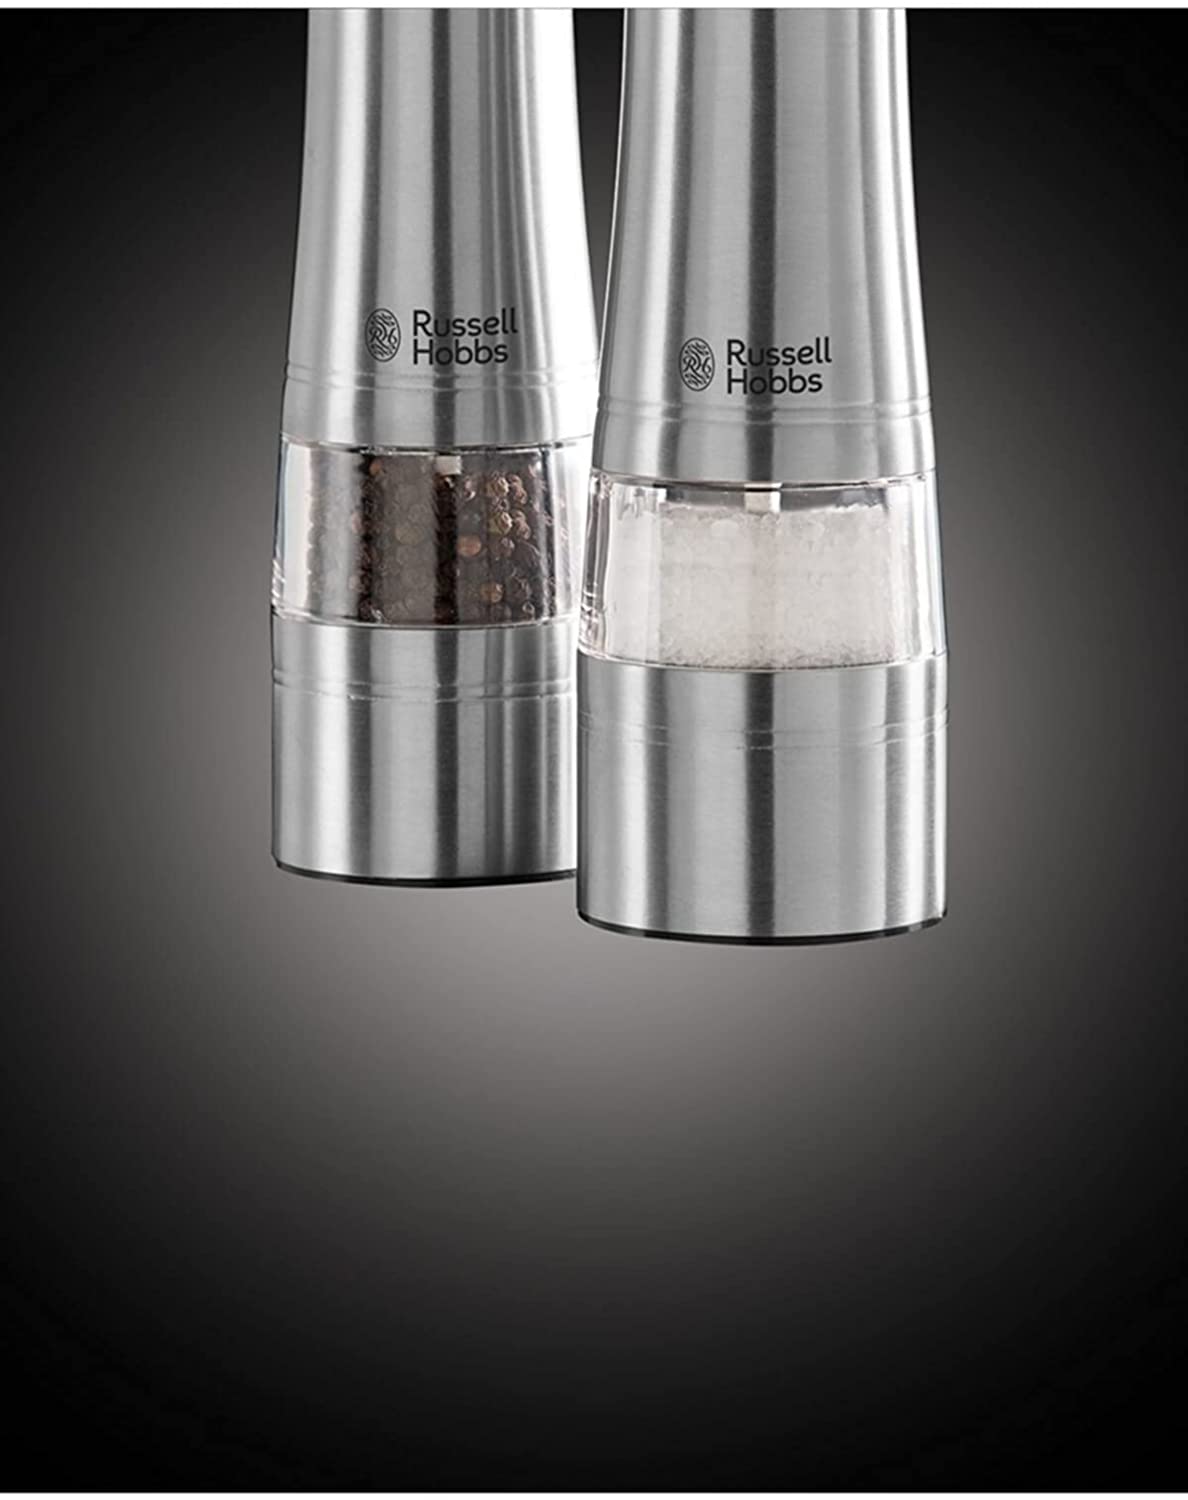 Russell Hobbs 23460 Battery Powered Salt and Pepper Grinders Stainless Steel and Silver